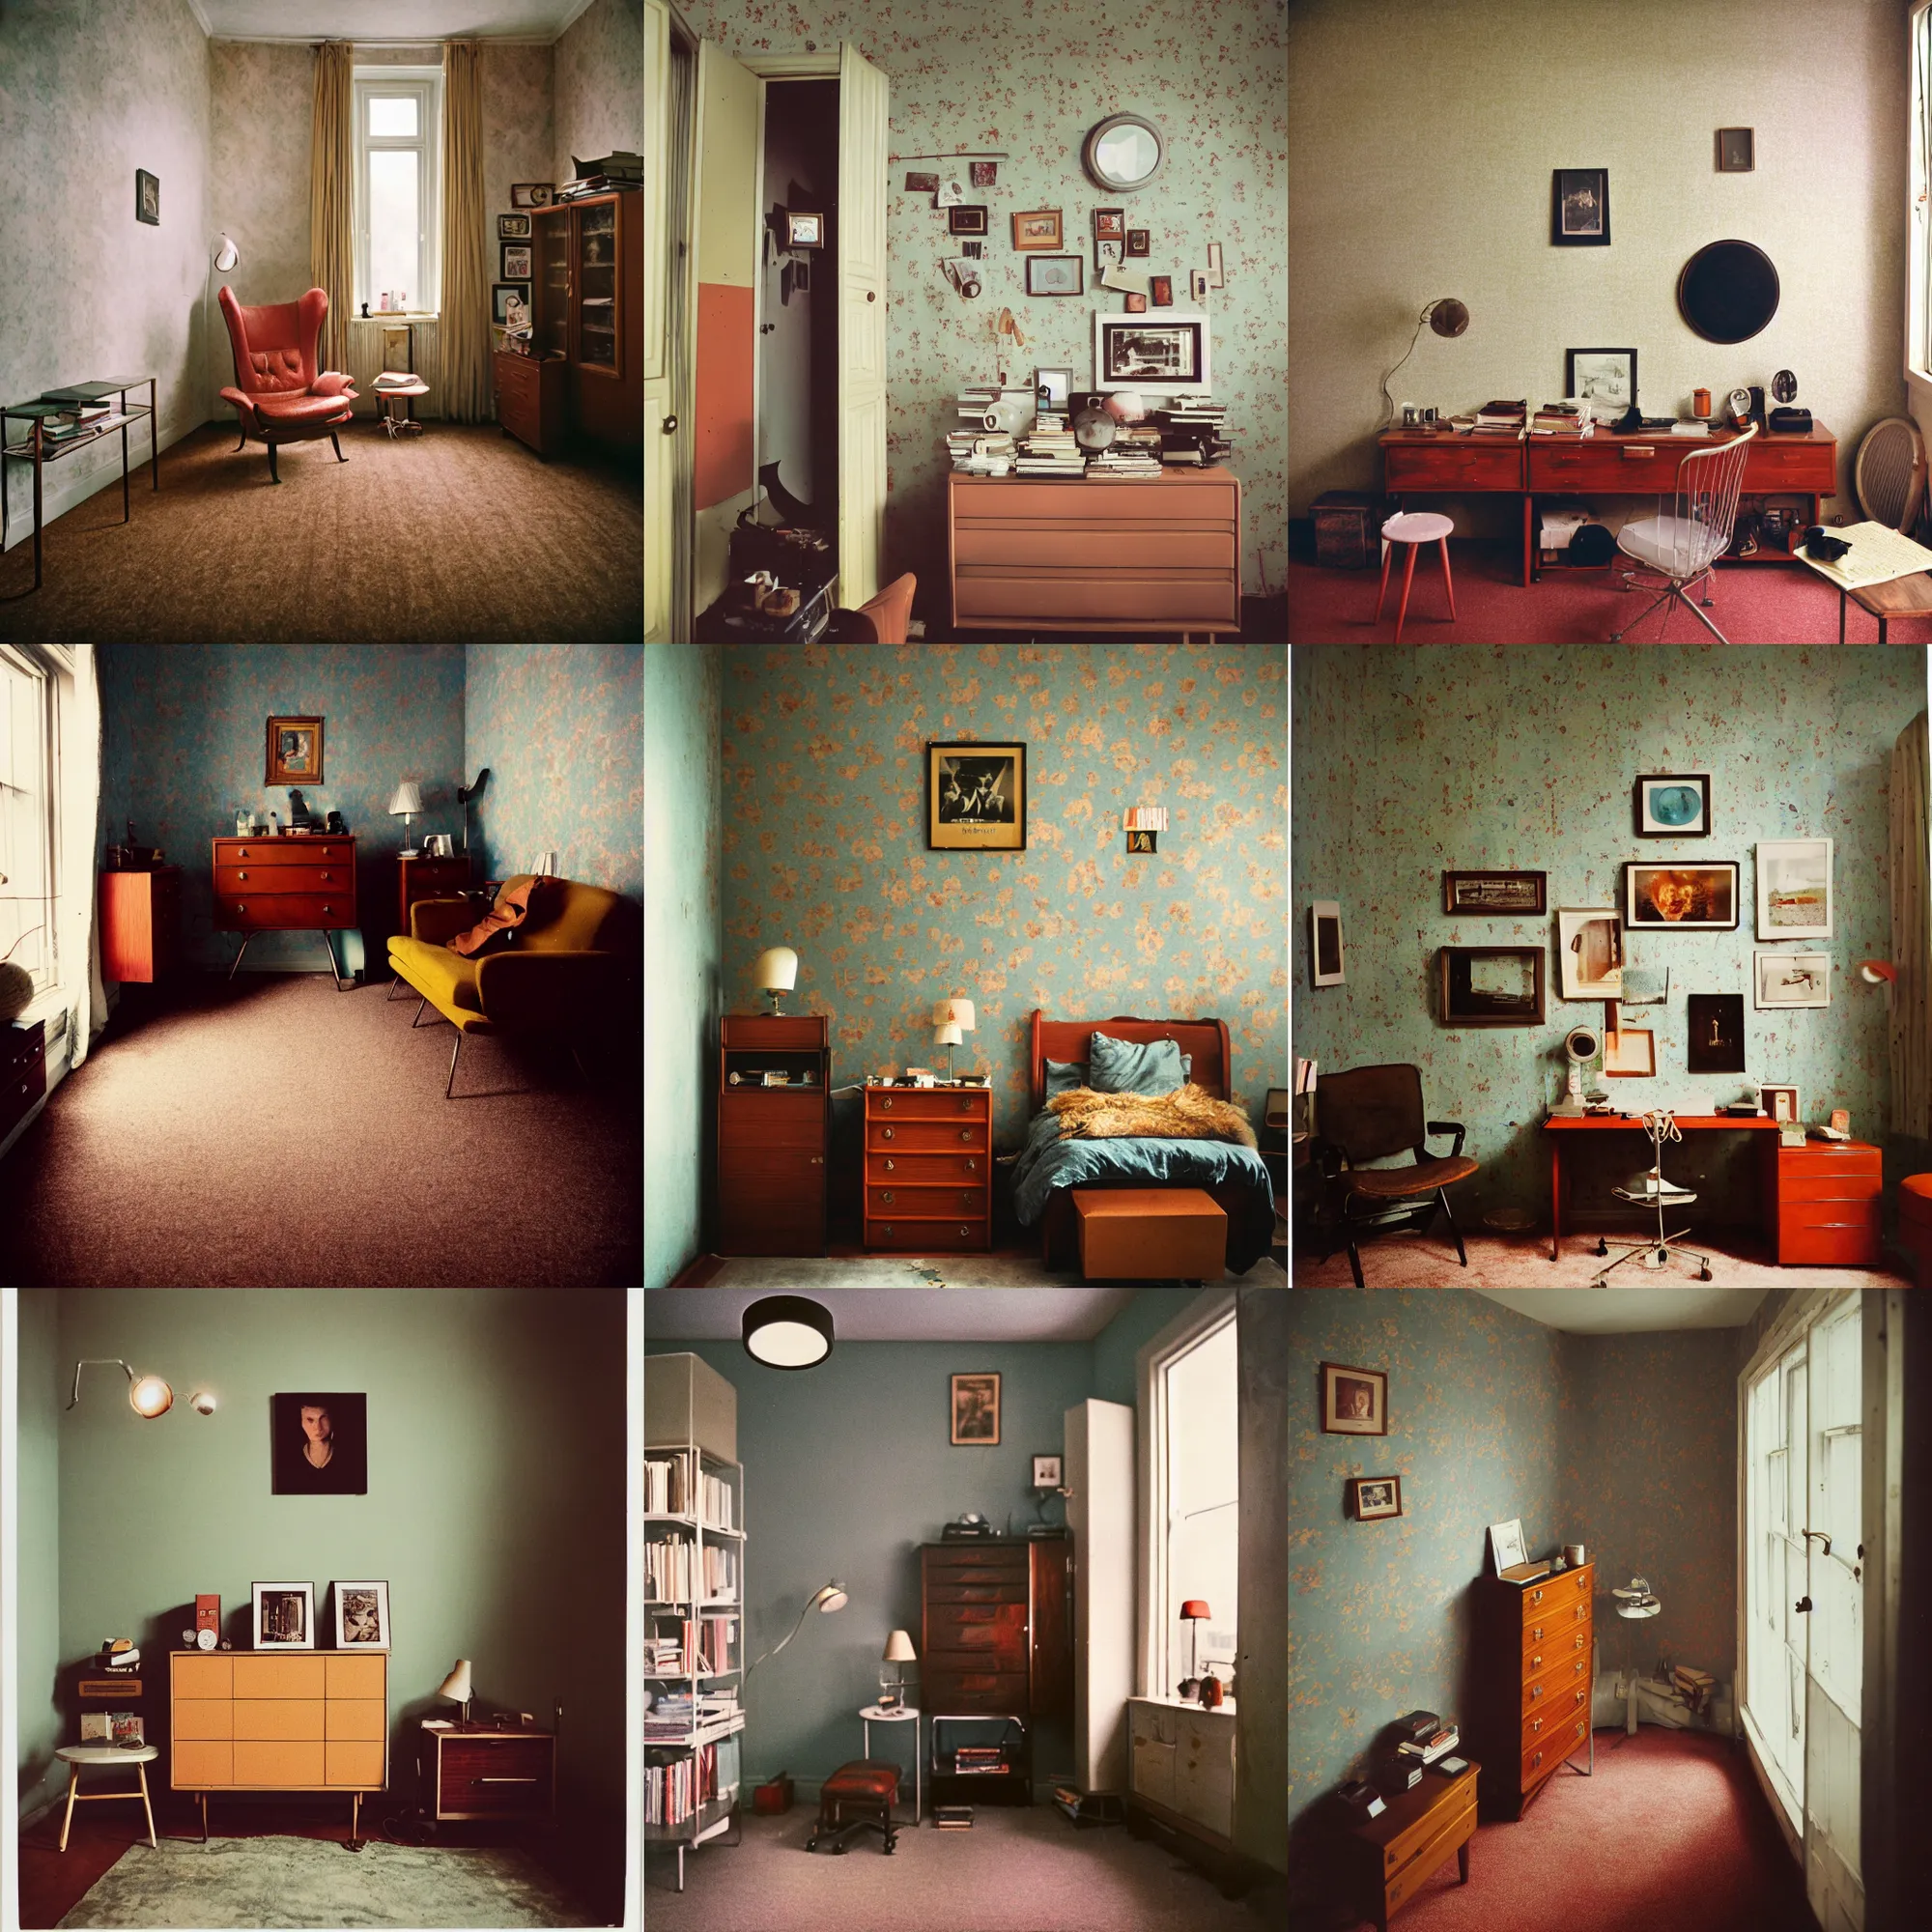 Prompt: kodak portra 4 0 0, wetplate, 8 mm extreme fisheye, award - winning portrait by britt marling of a 1 9 6 0 s room, picture frames, shining lamps, dust, 1 9 6 0 s metal bauhaus furniture, wallpaper, carpet, books, muted colours,